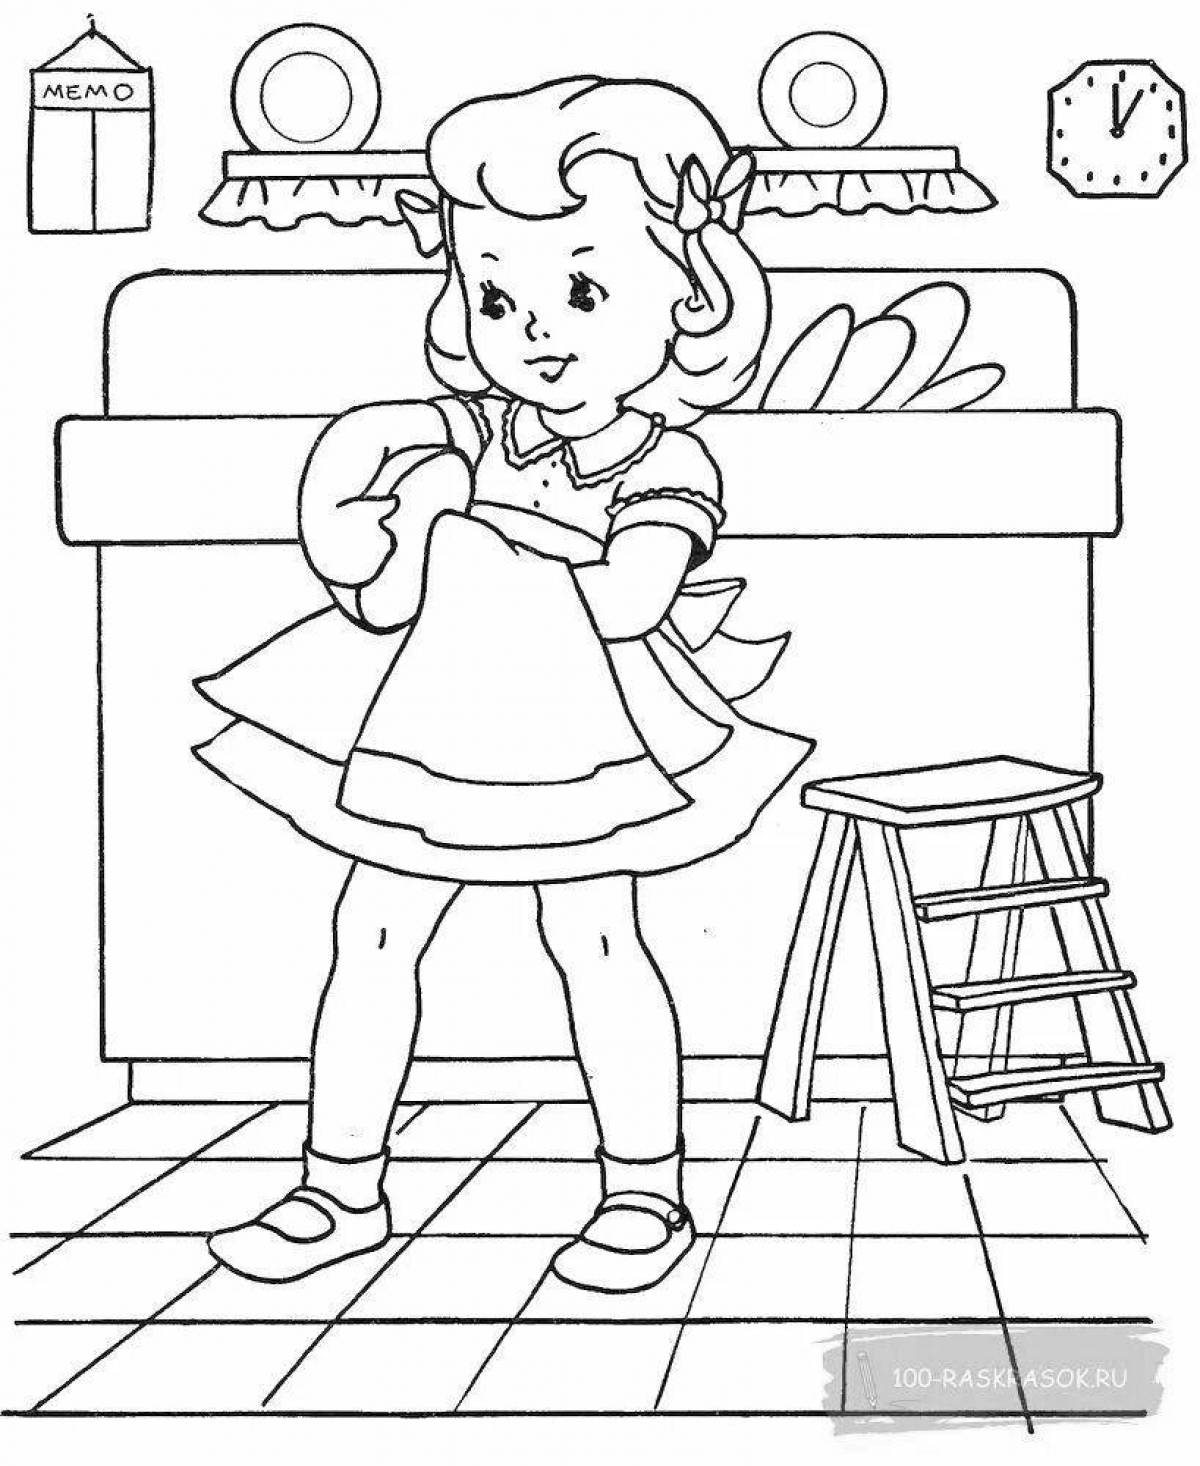 Exquisite Good Deeds Coloring Page